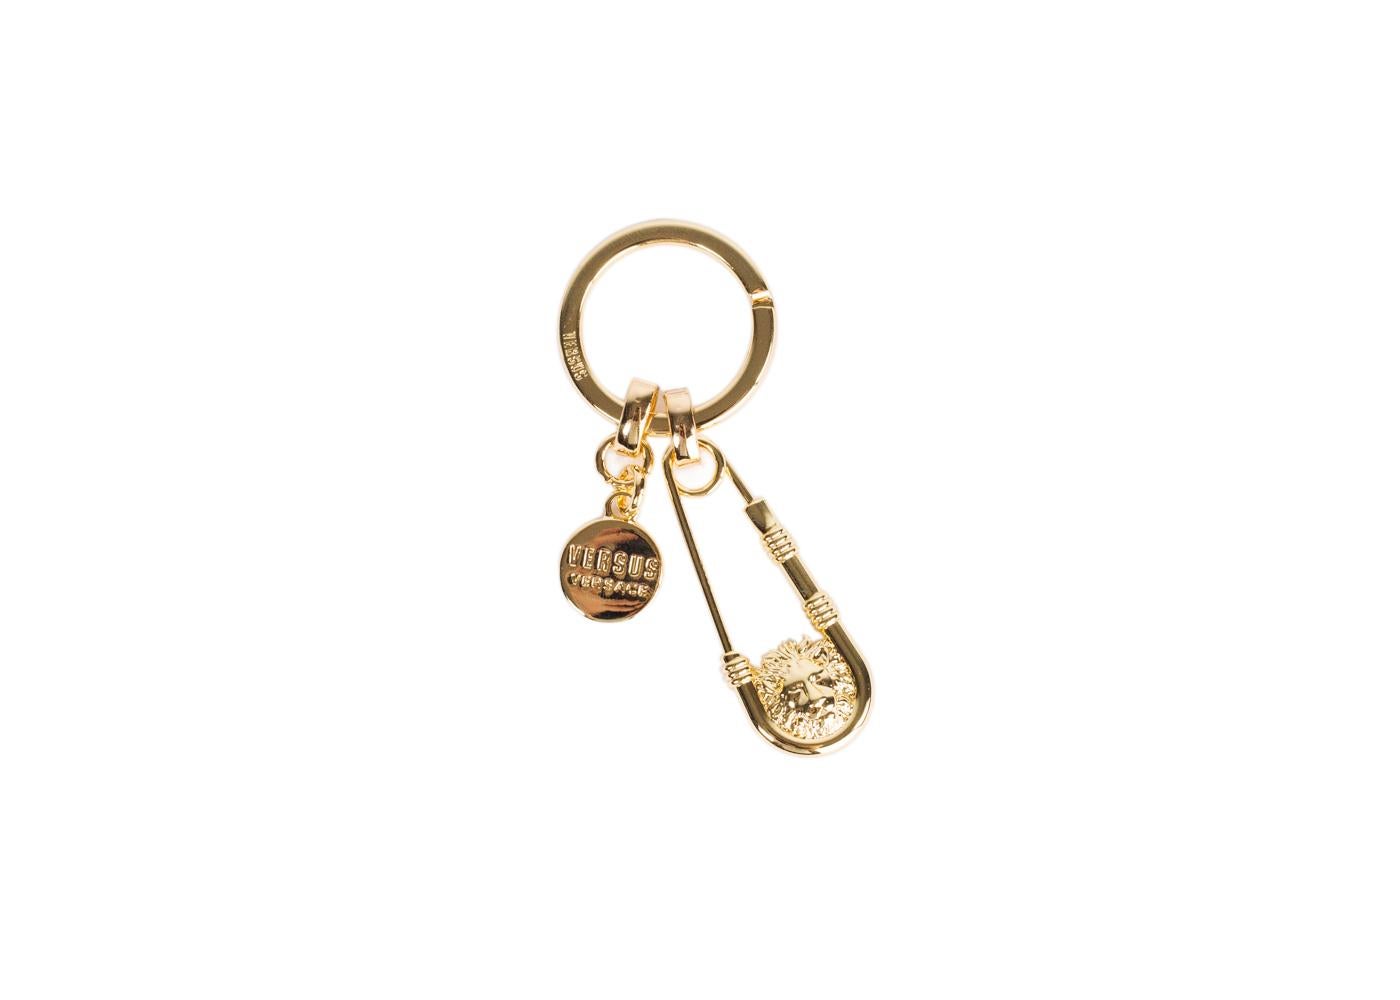 Why play if safe when you can add some edge with your Versus Versace Key Chain. This luxurious unit features a gold safety pin pendant, an encased signature lion head, and classic Versus Versace logo pendant. You can tastefully pin your essentials